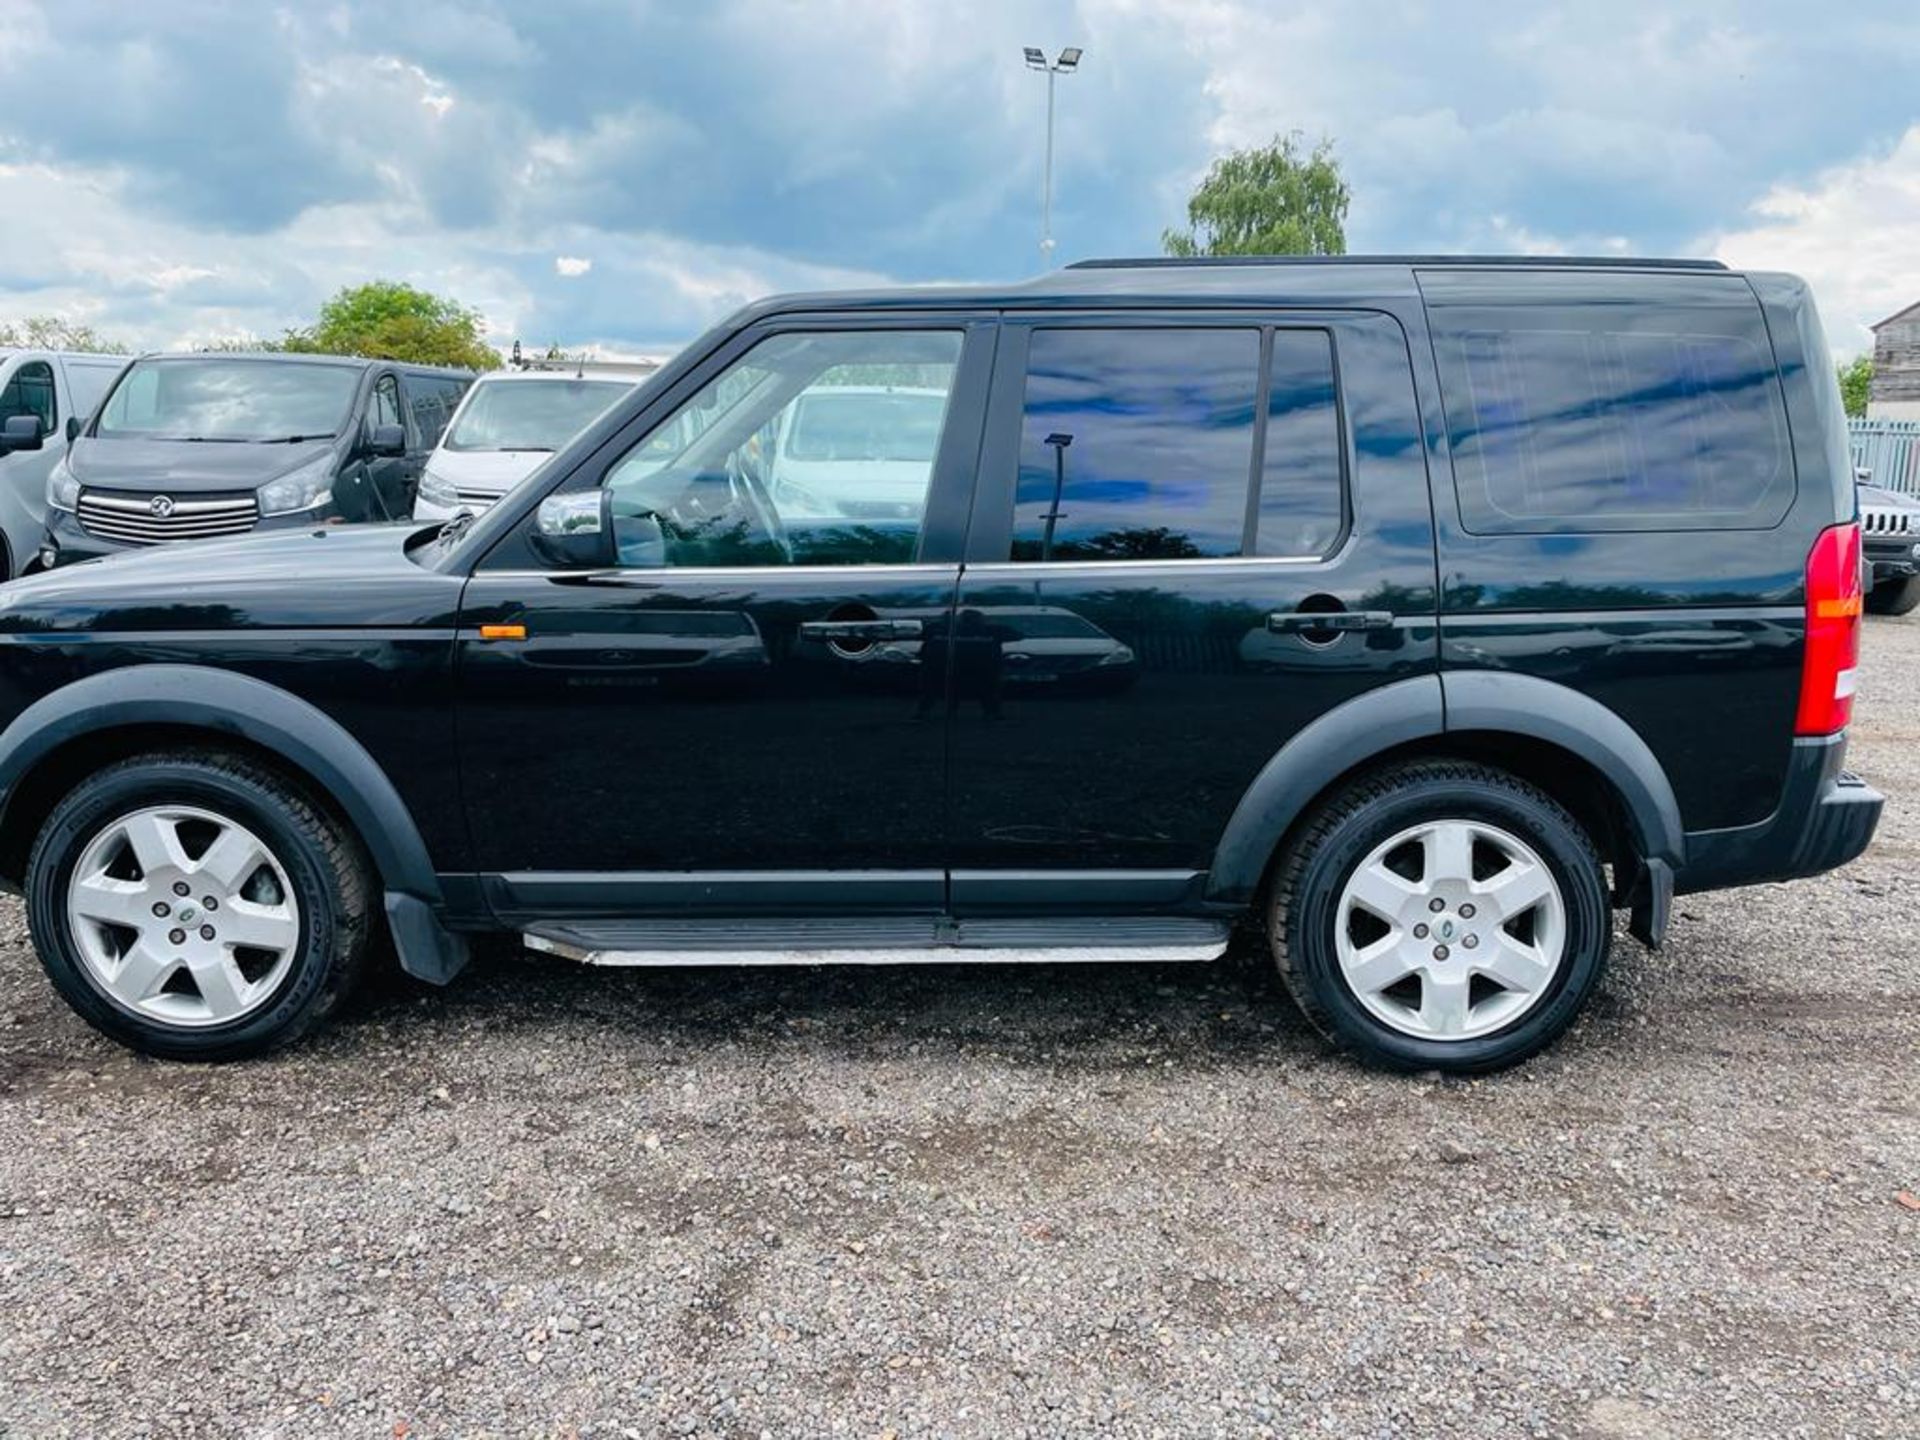 ** ON SALE ** Land Rover Discovery 2.7 TDV6 HSE 4WD 2005 '05 Reg' - Sat Nav - A/C - 7 seats Top Spec - Image 7 of 26